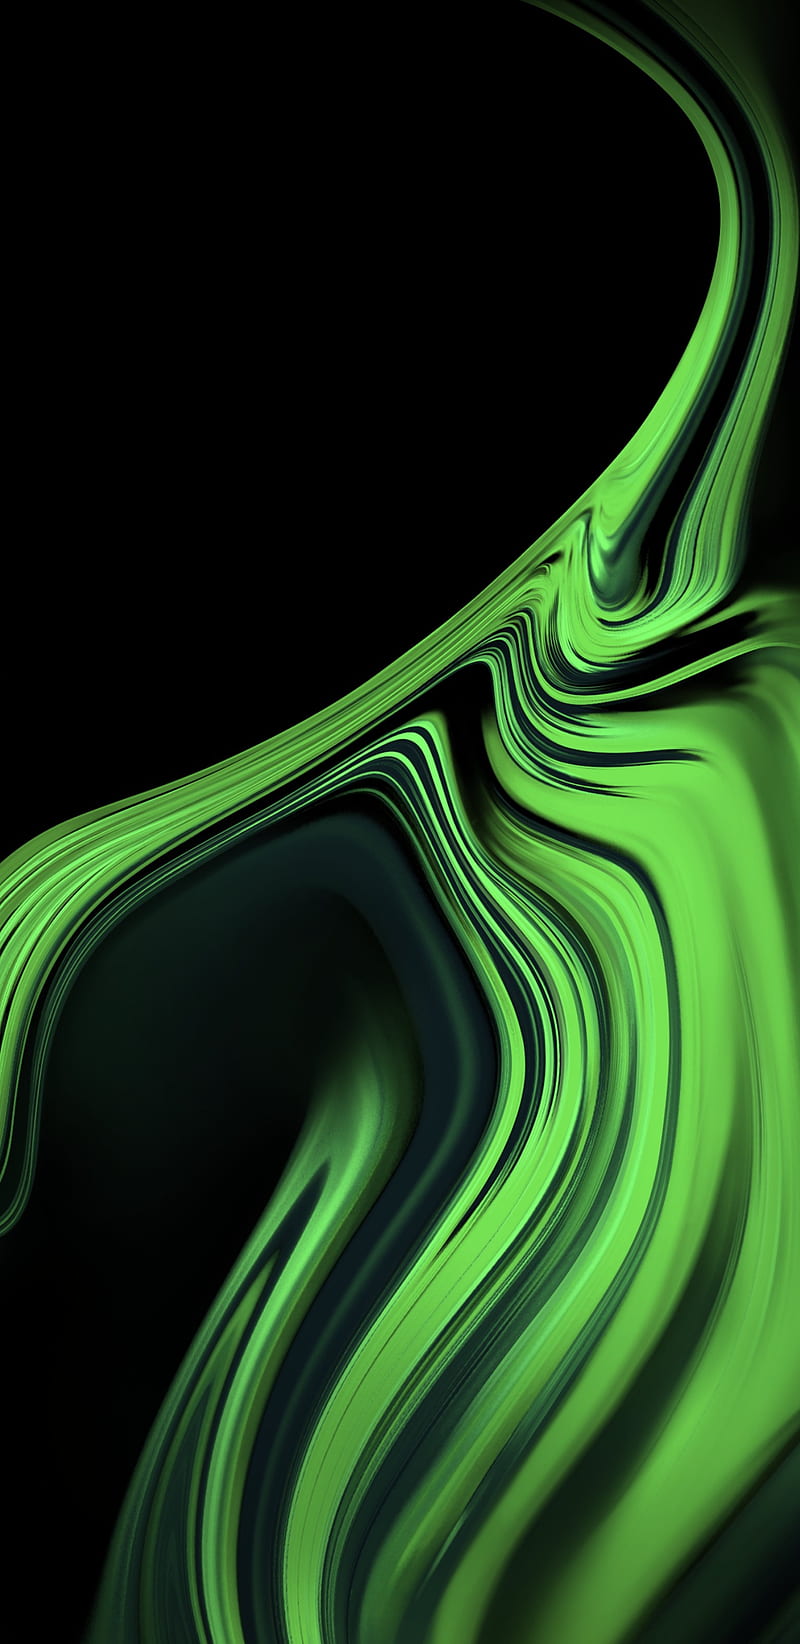 Note 9 Stock green, abstract, black, epic, galaxy, green, note, note 8, note 9, samsung, stoche, HD phone wallpaper